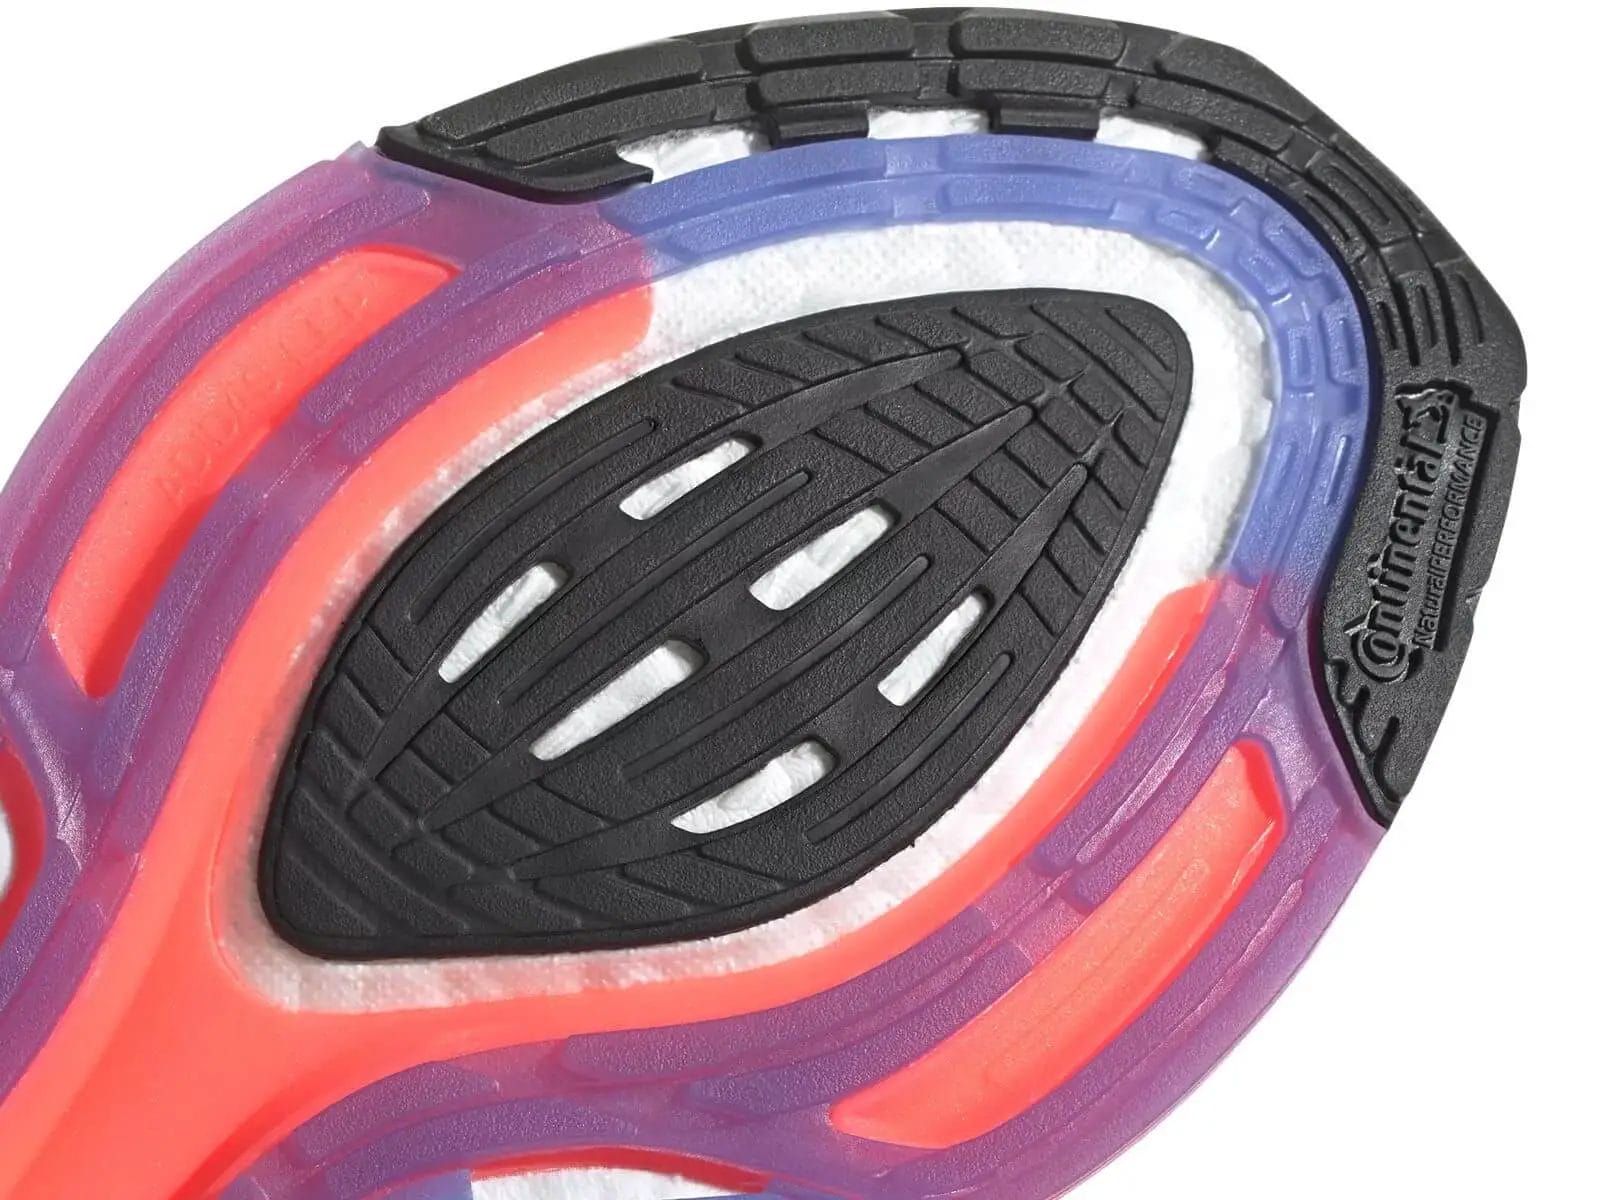 Closeup of the forefoot outsole.